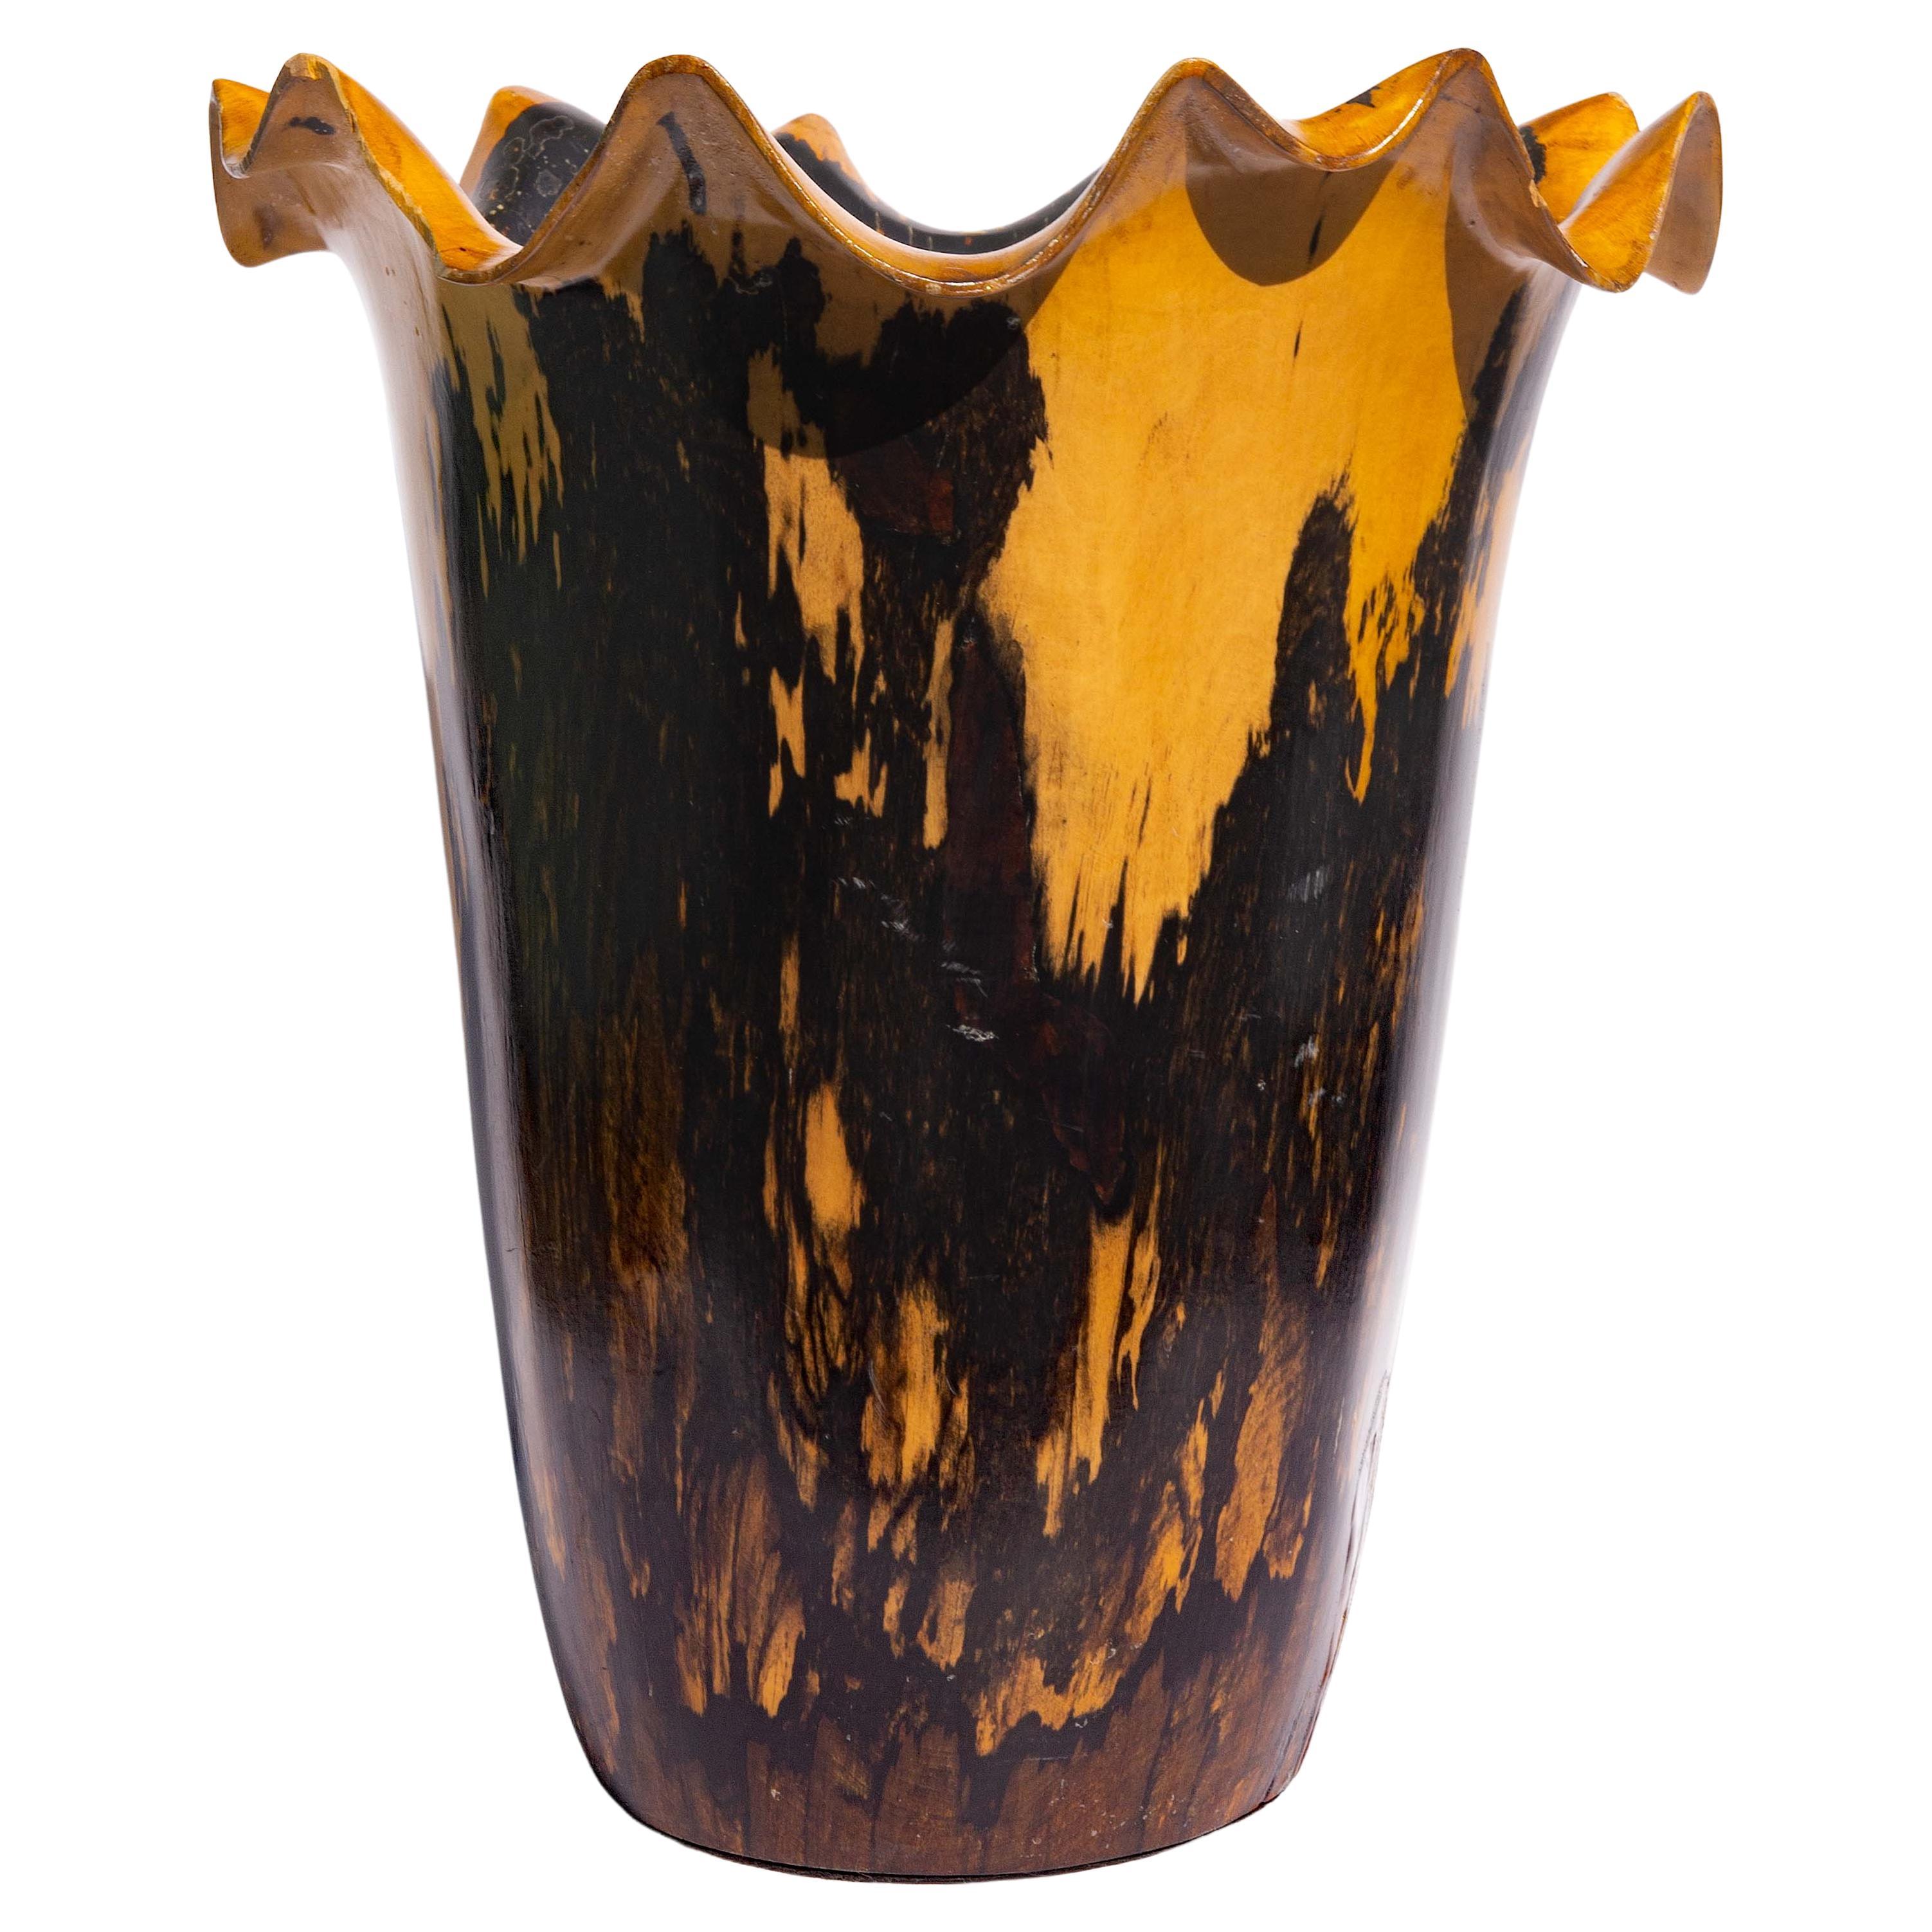 Cocobolo carved vase. Beautifully figured wood.